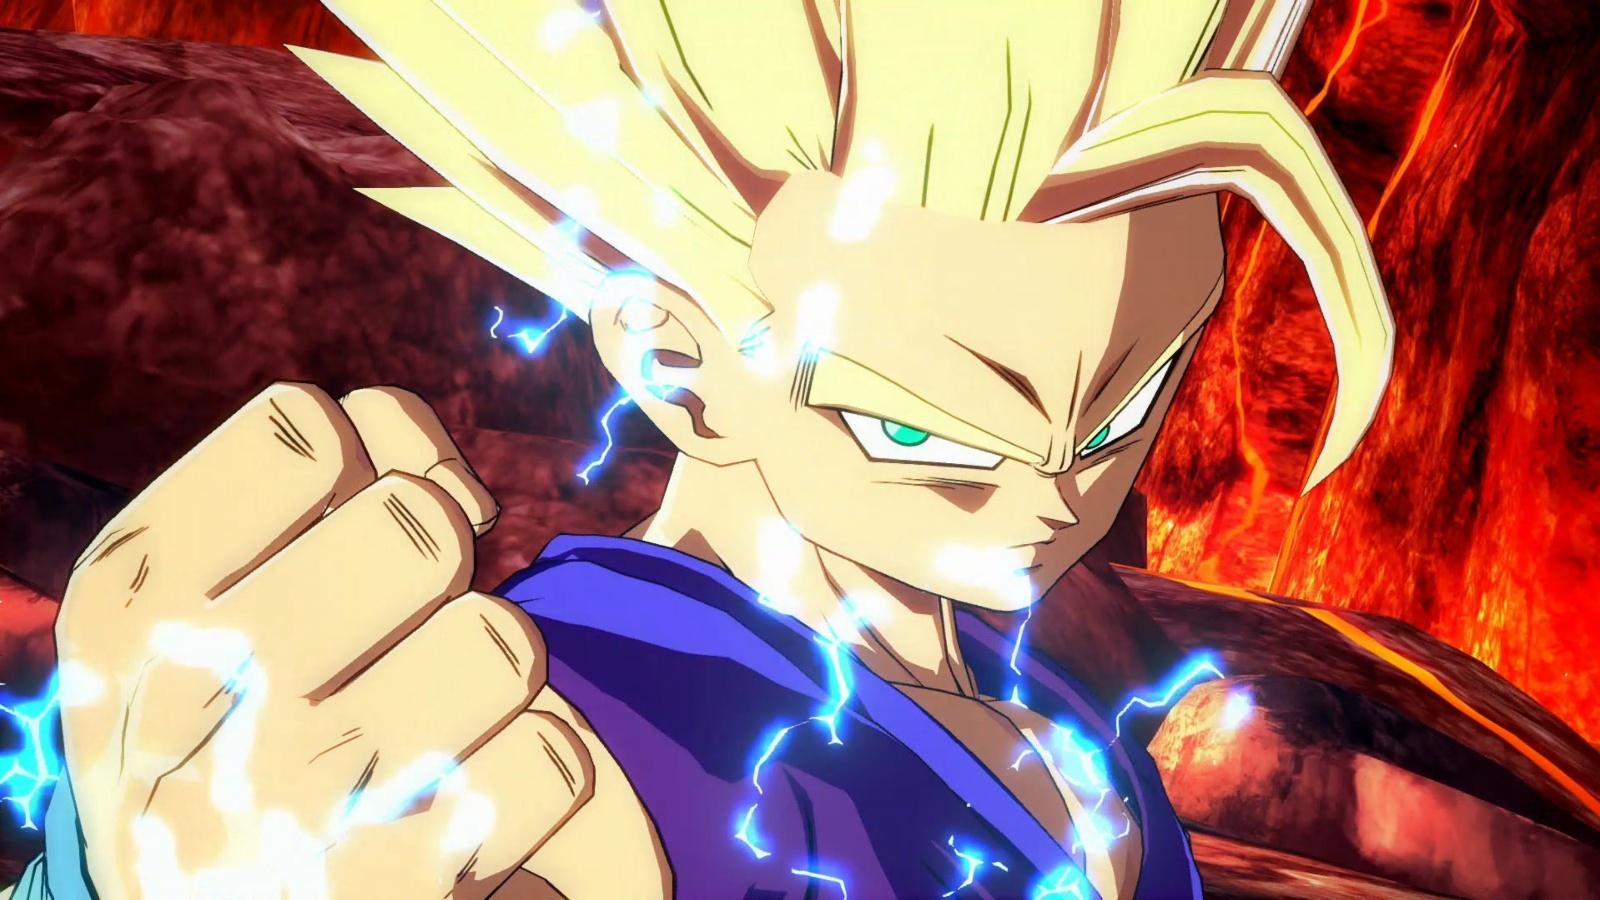 A screenshot from the game Dragon Ball FighterZ